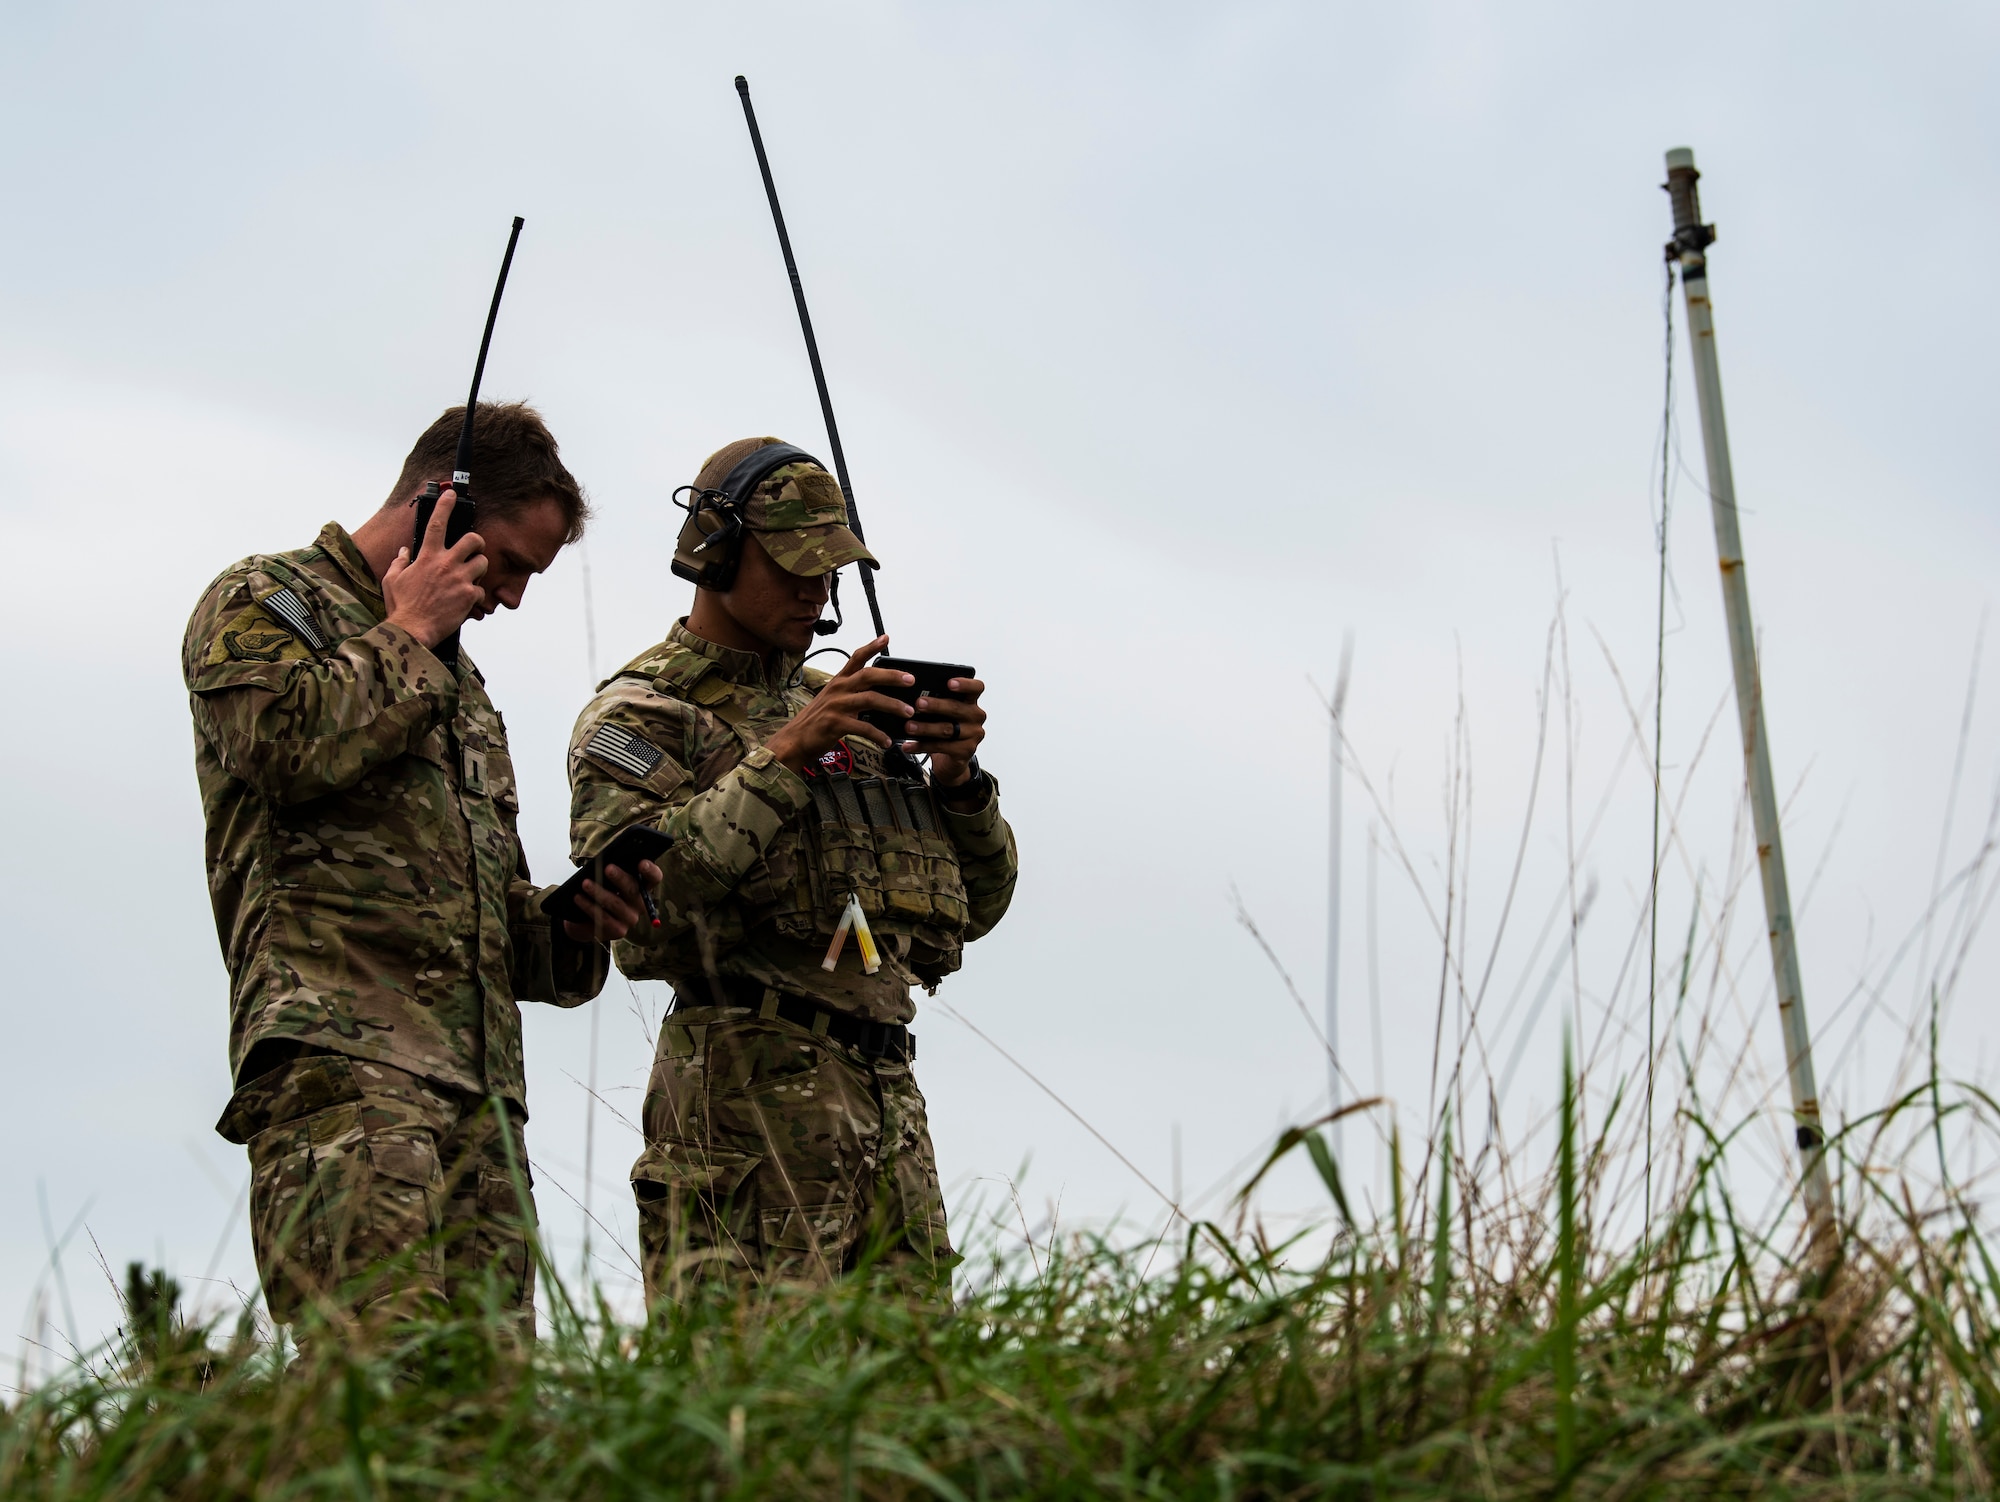 U.S. Air Force 1st Lt. Clay West, air liaison officer from the 15th Air Support Operations Squadron, Fort Stewart, Georgia (left), listens to a soldier from the 7th Special Forces Group communicate with a live aircraft Sept. 13, 2018 at Kunsan Air Base, Republic of Korea. Special Forces soldiers must be well versed in multiple aspects of modern combat, such as being able to call in air strikes when no trained personnel are available. (U.S. Air force photo by Senior Airman Stefan Alvarez)